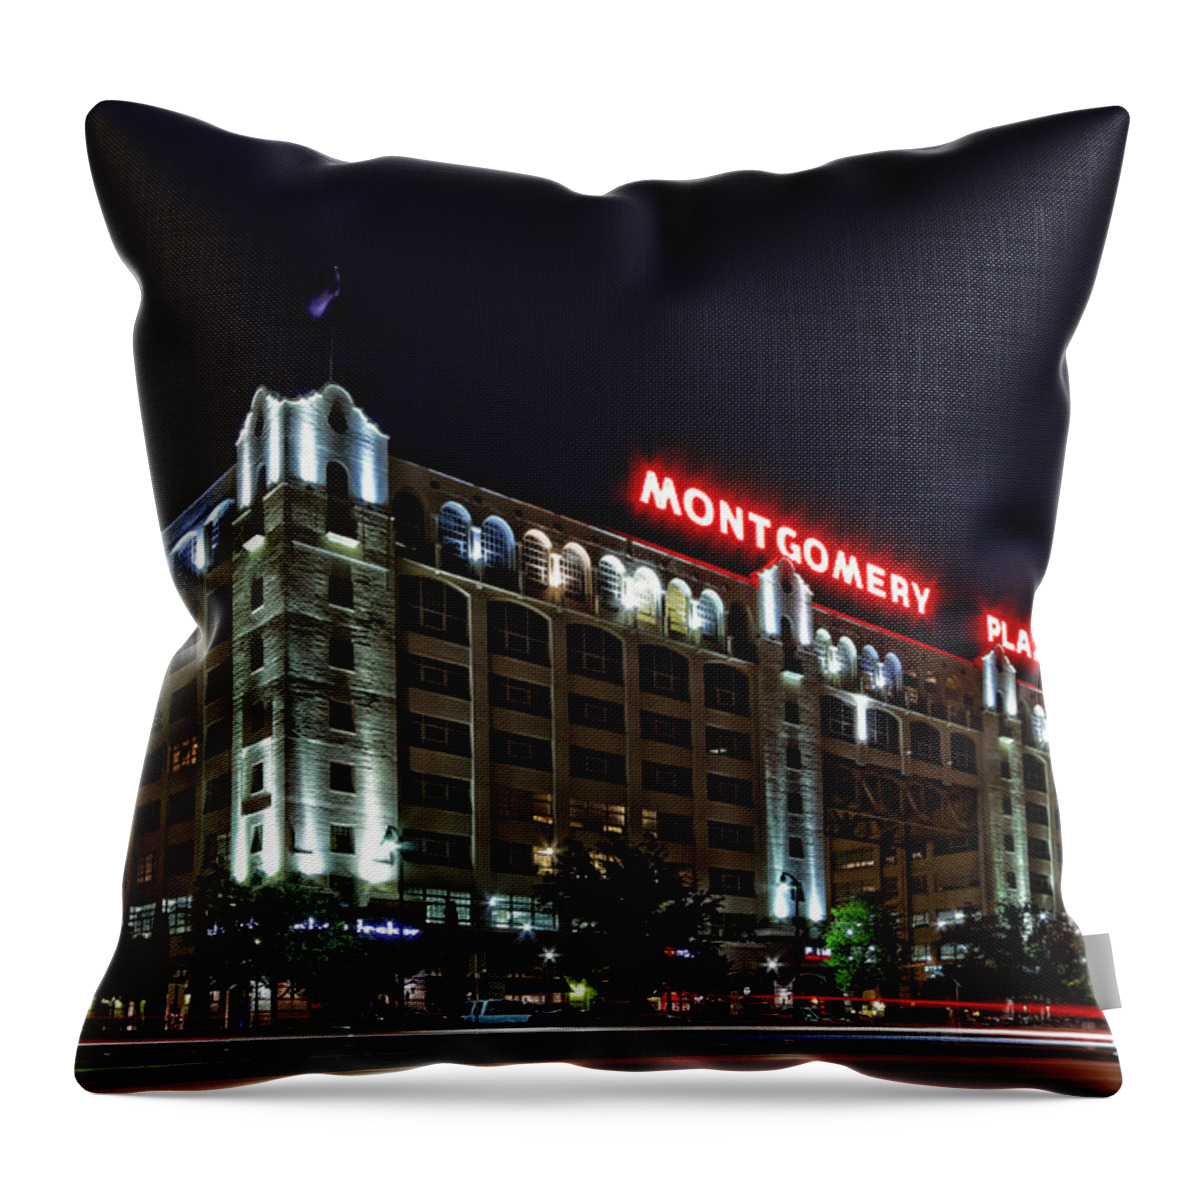 Montgomery Plaza Throw Pillow featuring the photograph Montgomery Plaza Fort Worth by Jonathan Davison